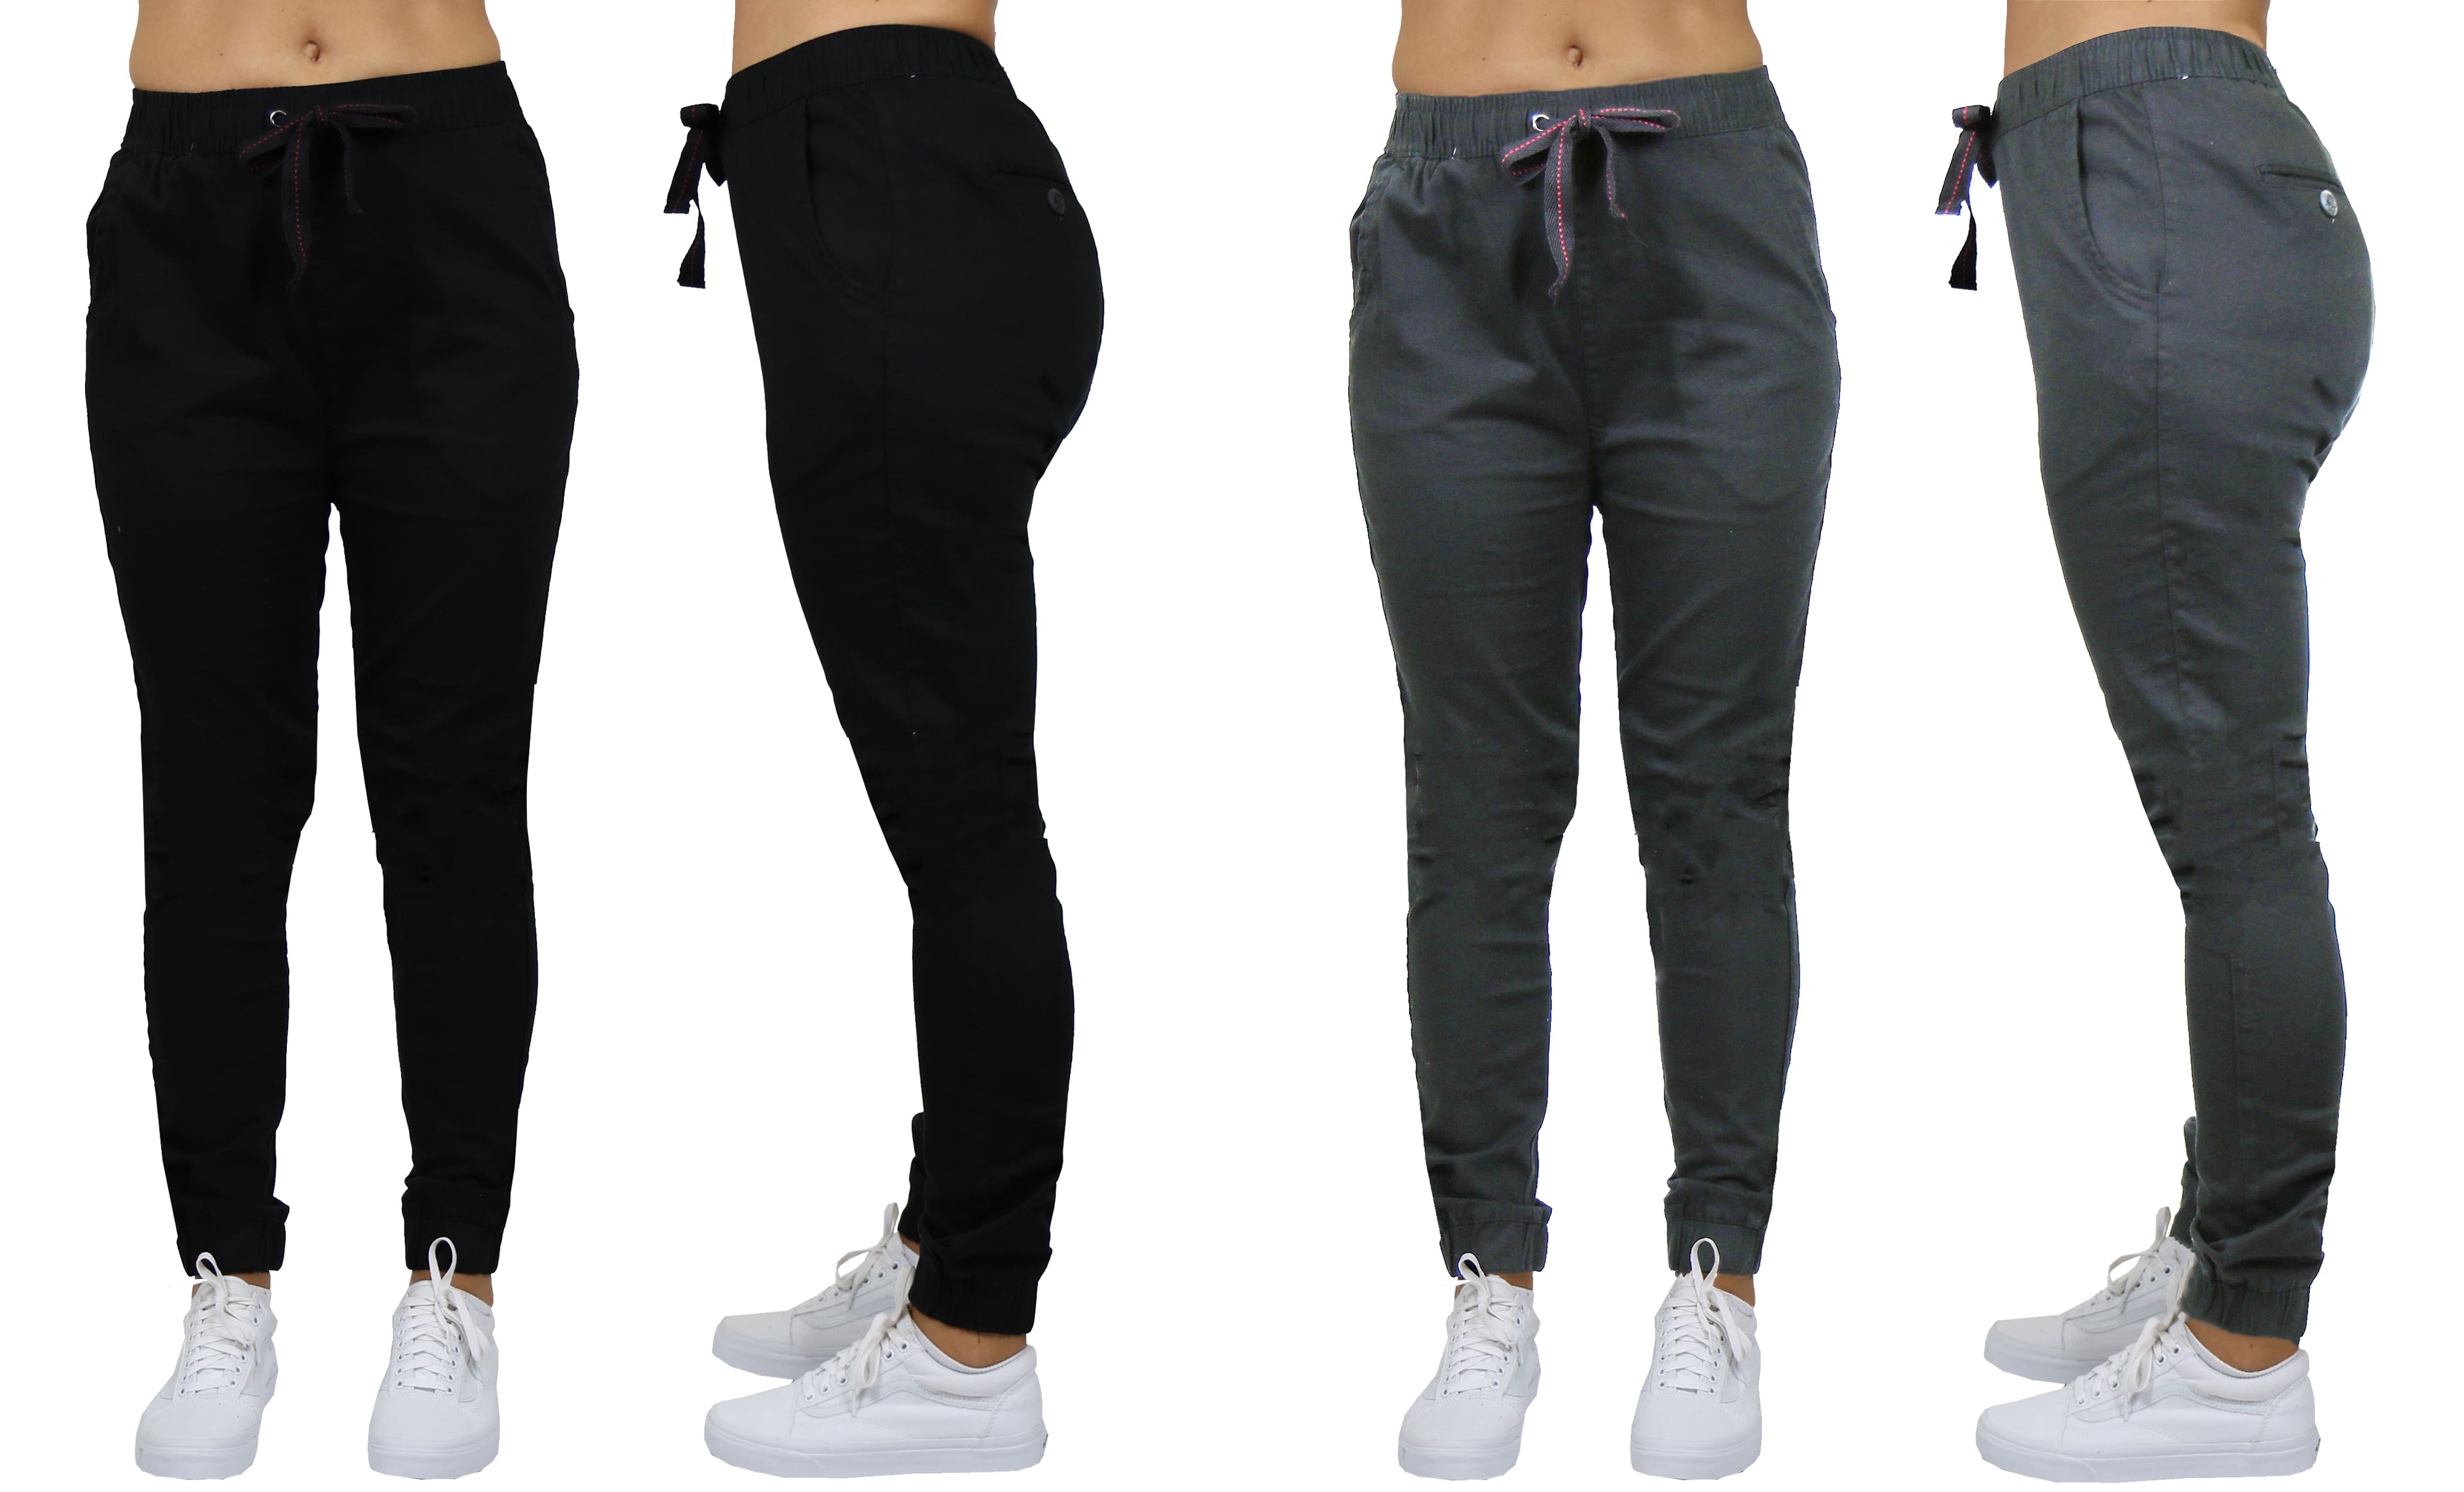 Galaxy By Harvic Loose Fit Stretch Twill Women's Joggers 2 Pack